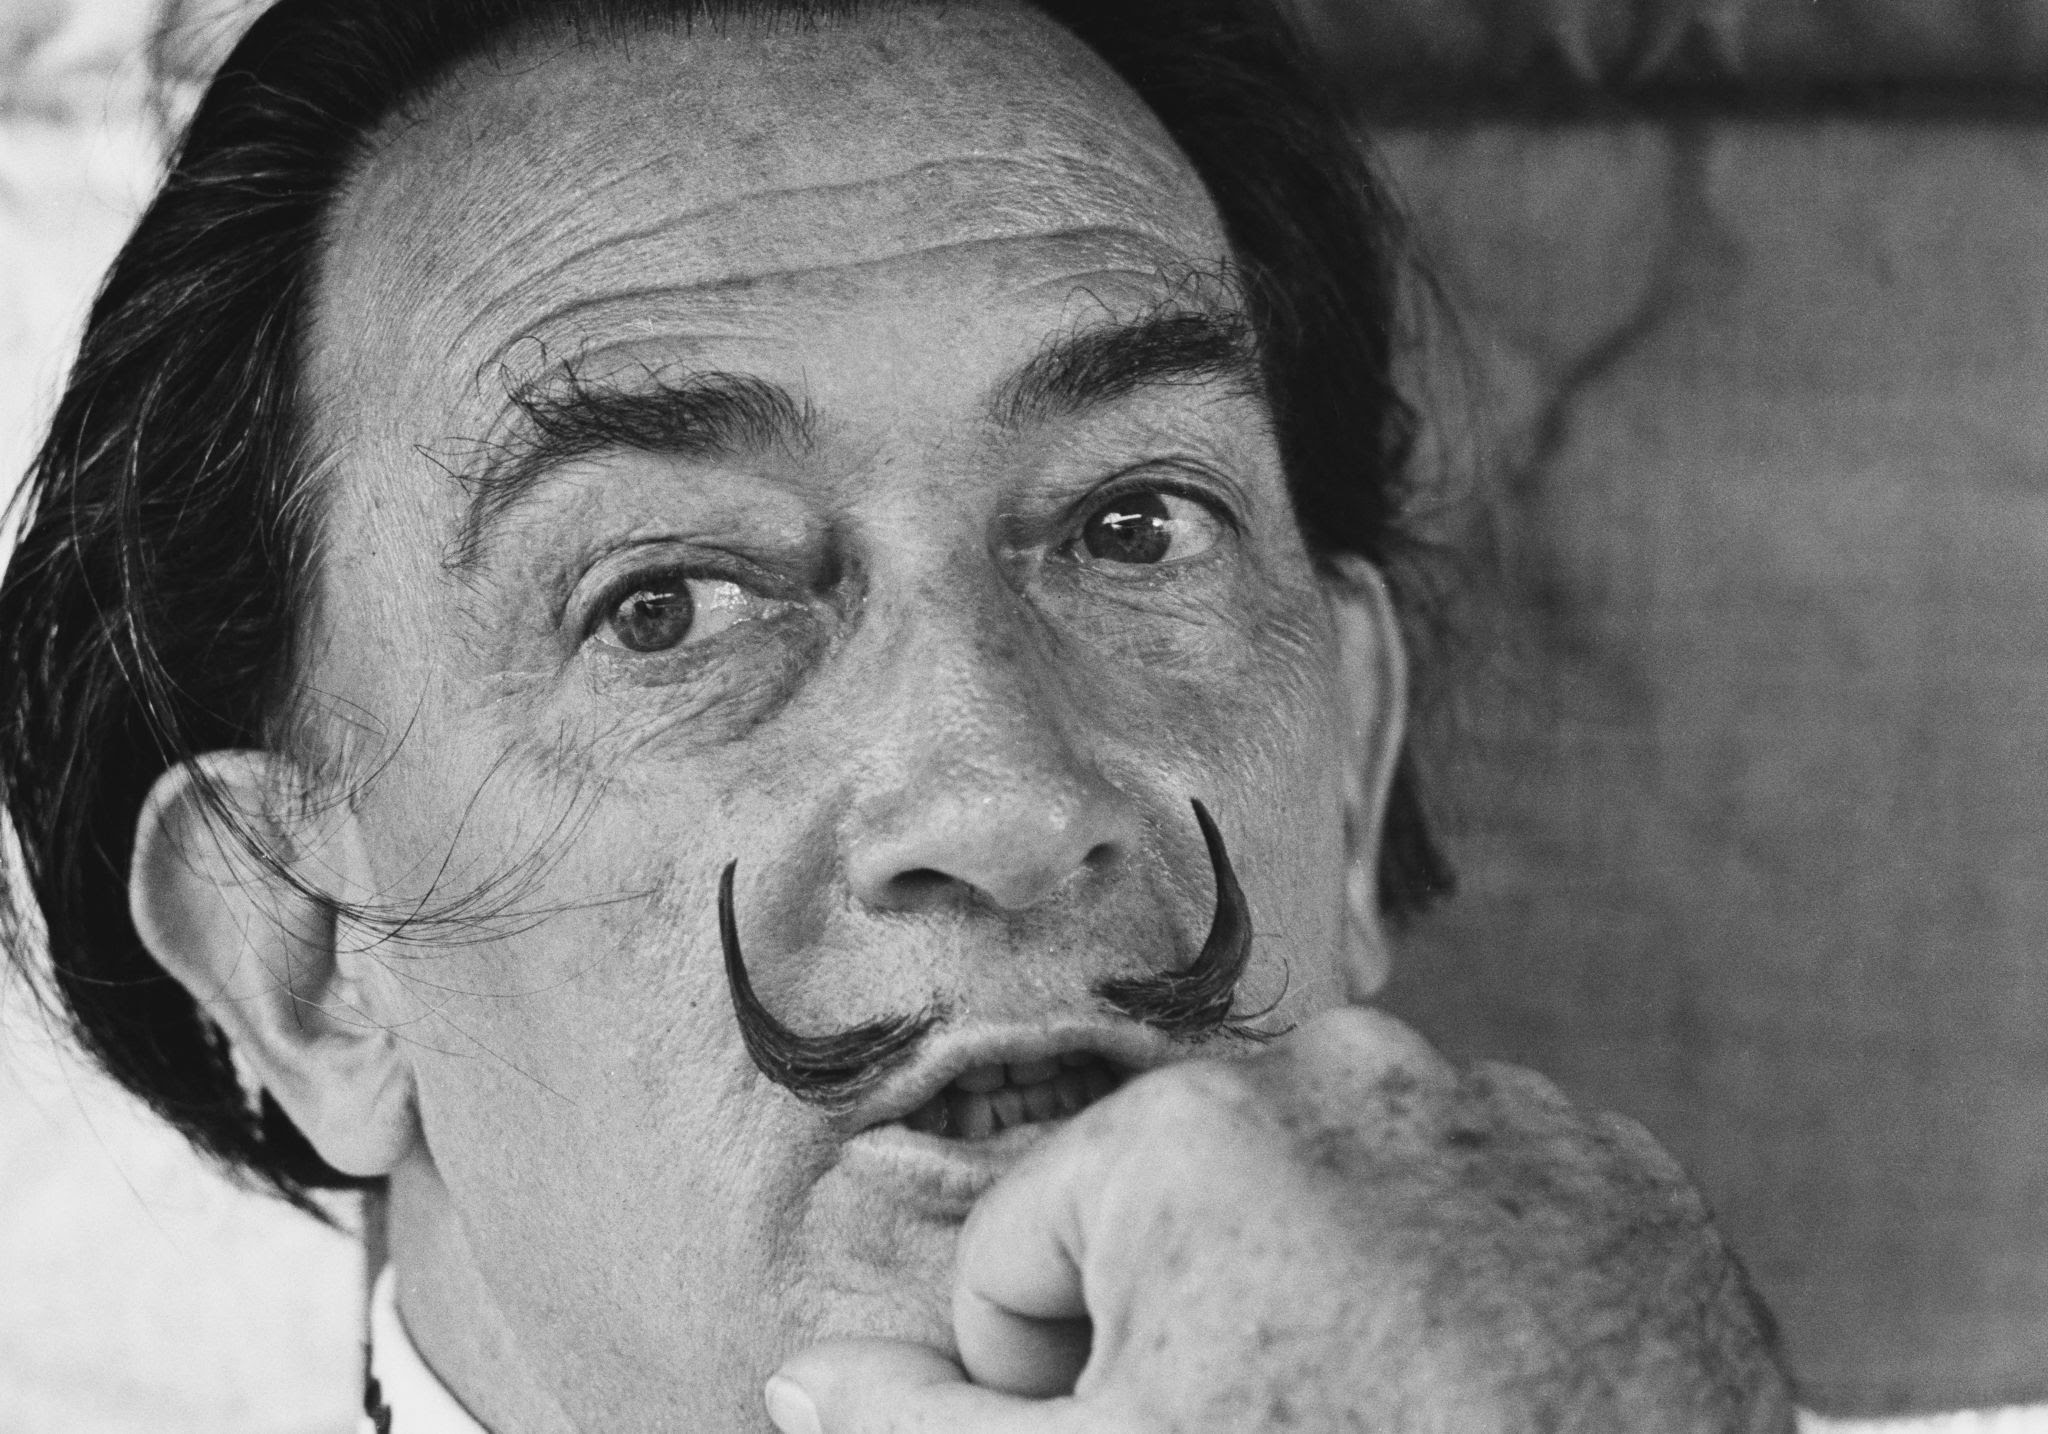 Salvador Domingo Felipe Jacinto Dalí i Domènech, Marquess of Dalí of Púbol gcYC, known as Salvador Dalí, was a Spanish surrealist artist renowned for his technical skill, precise draftsmanship, and the striking and bizarre images in his work.